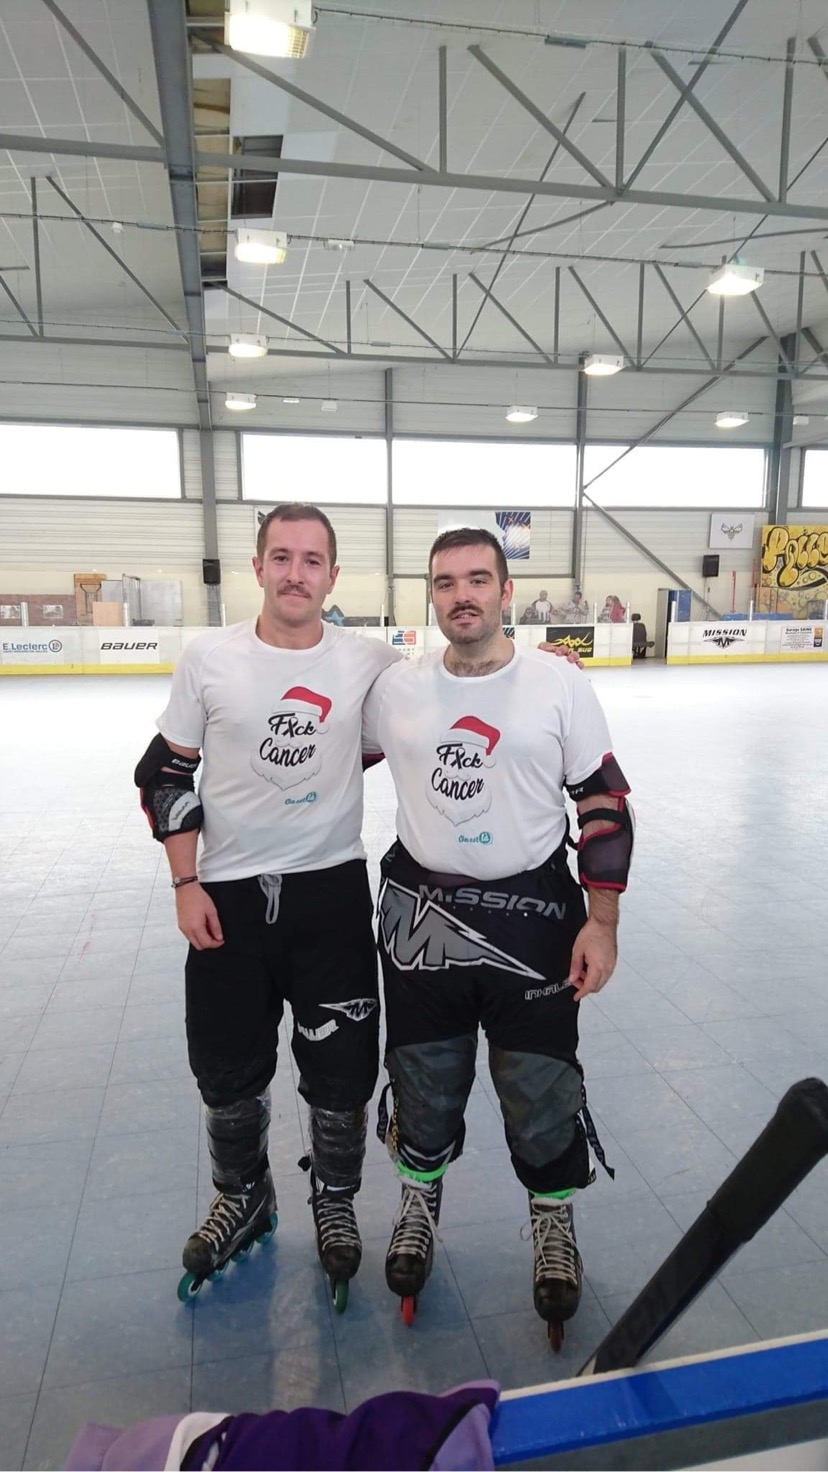 Les hockeyeurs solidaires